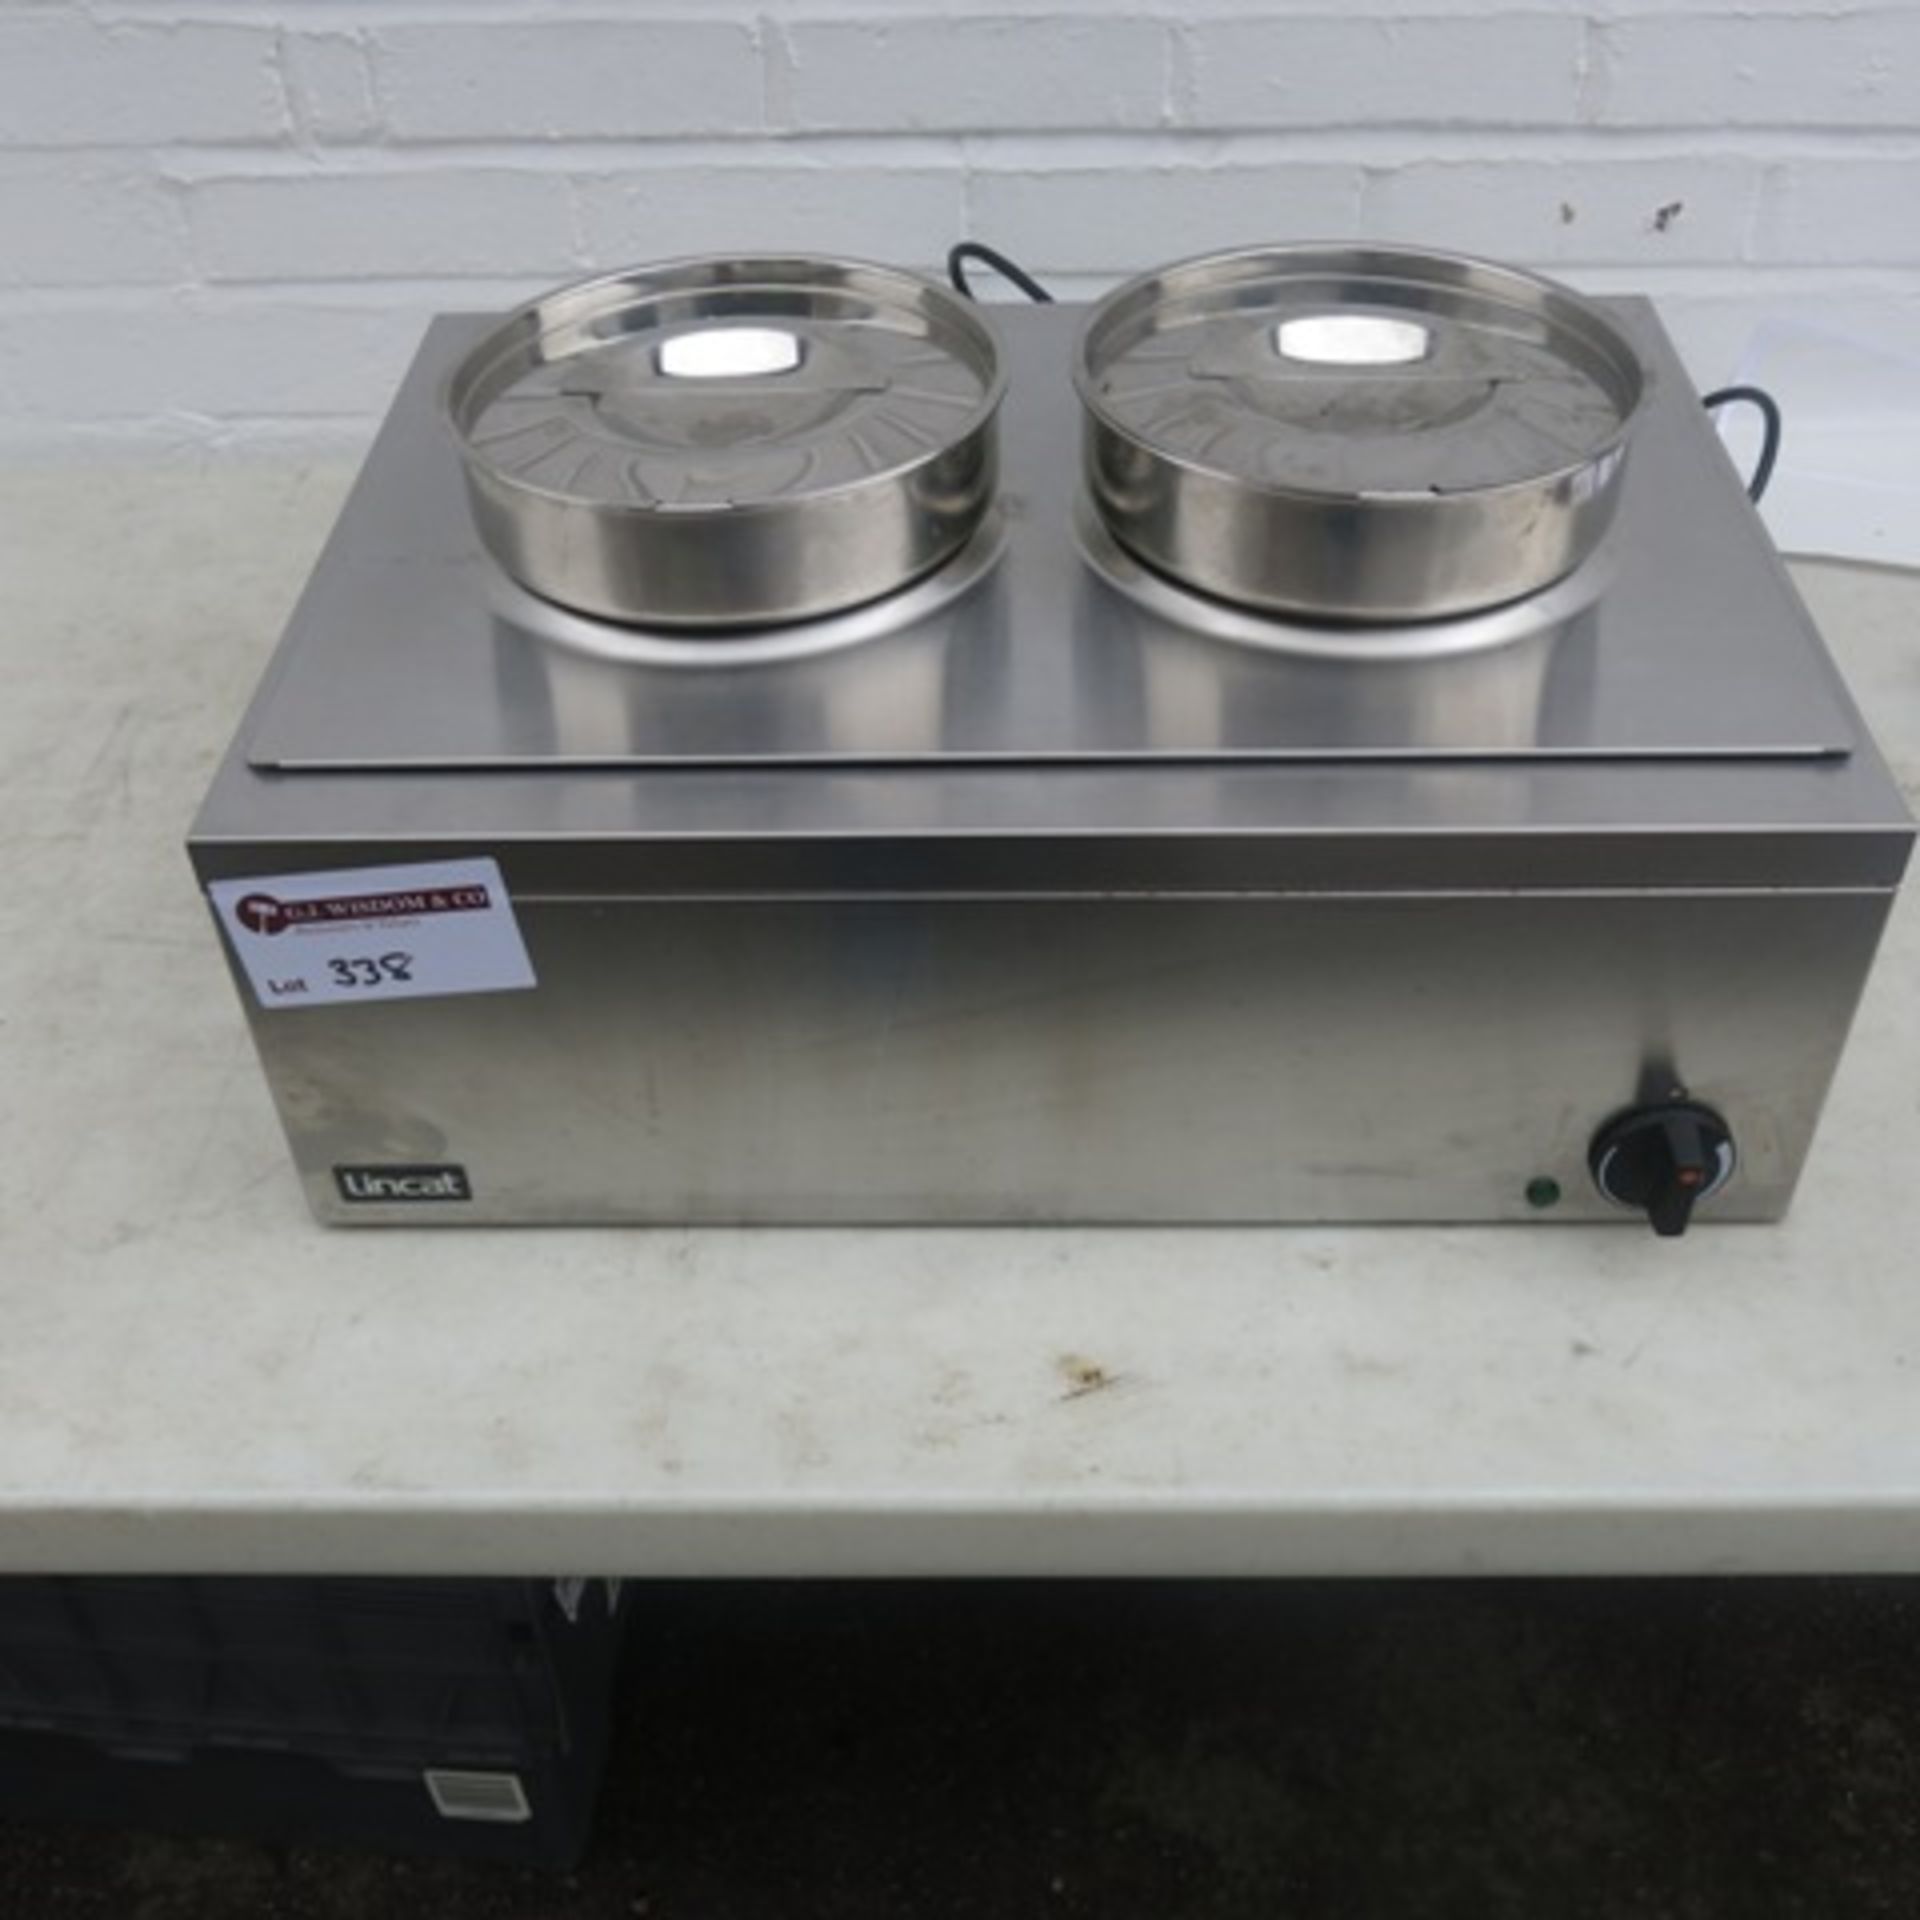 Lincat Counter Top Electric Bain Marie, Model LRB2W. Comes with 2 Round Pots